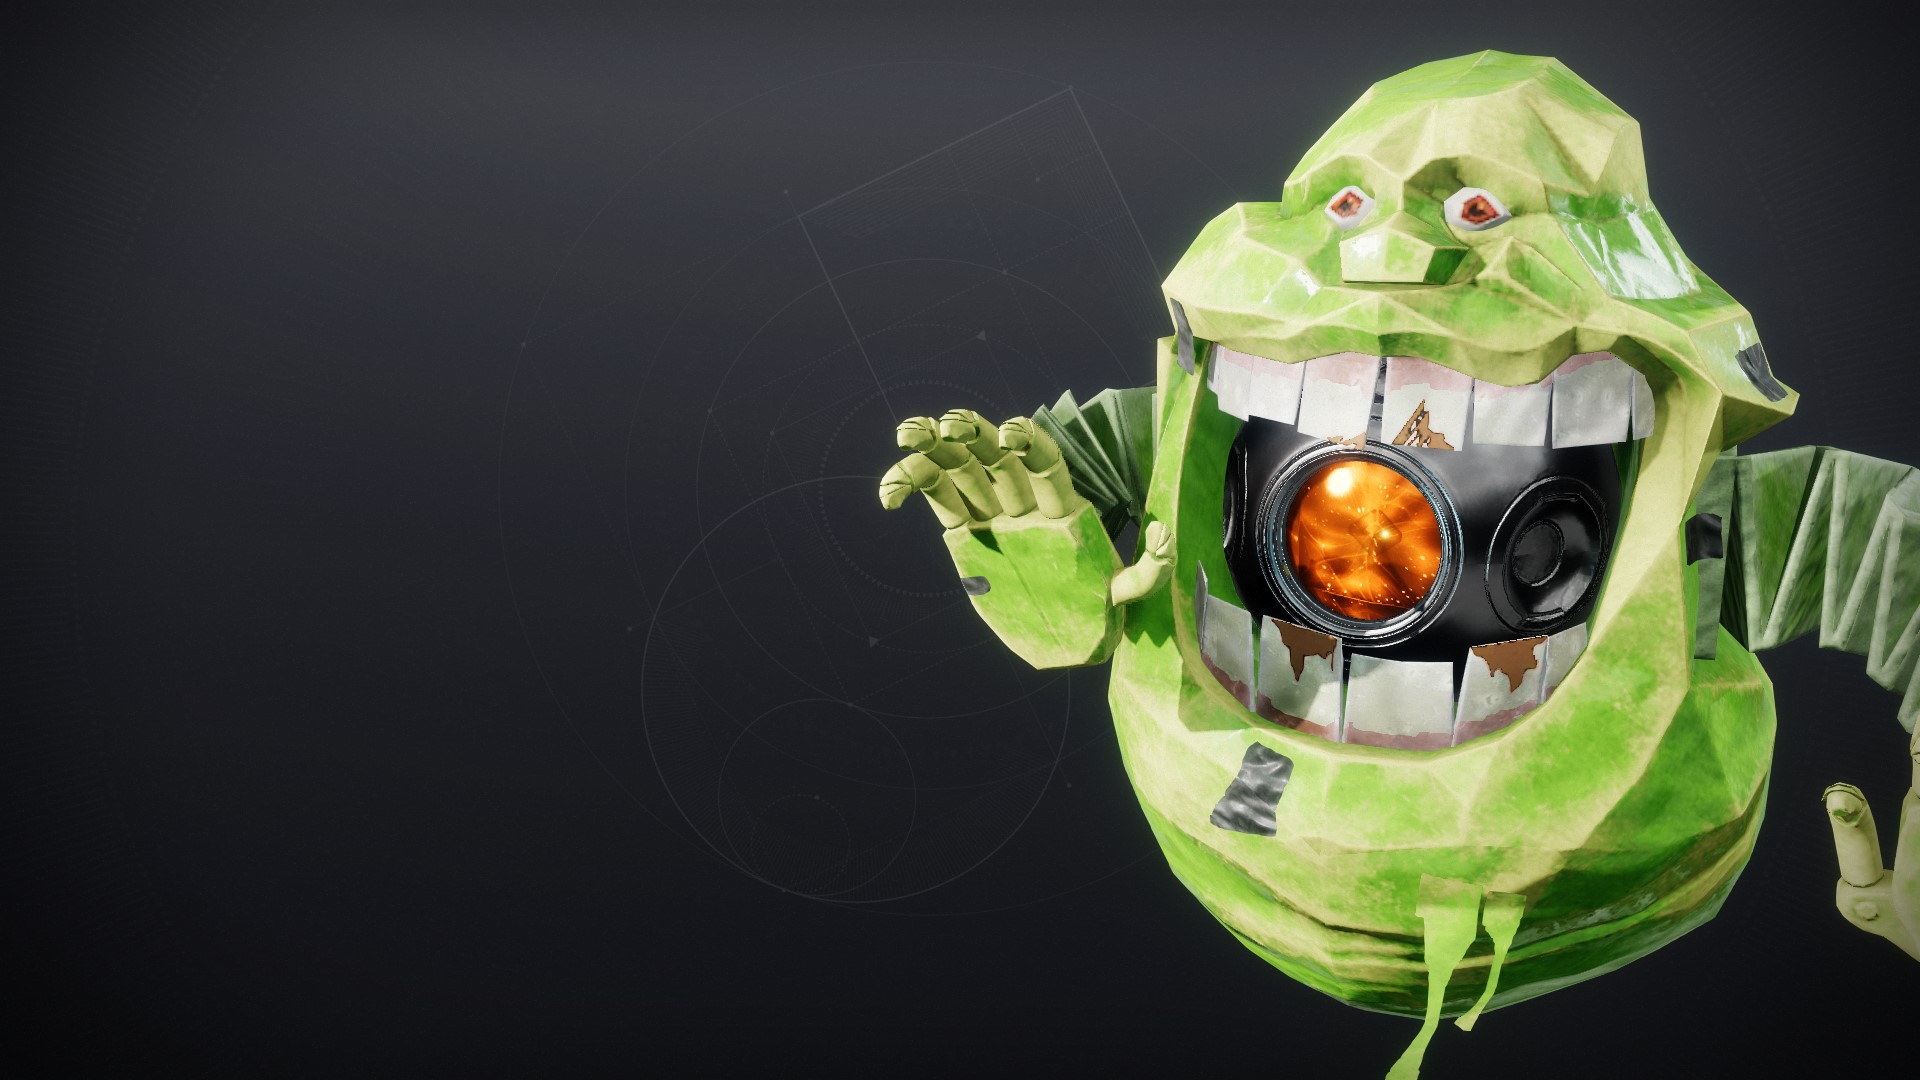 An in-game render of the Ugly Little Spud Shell.